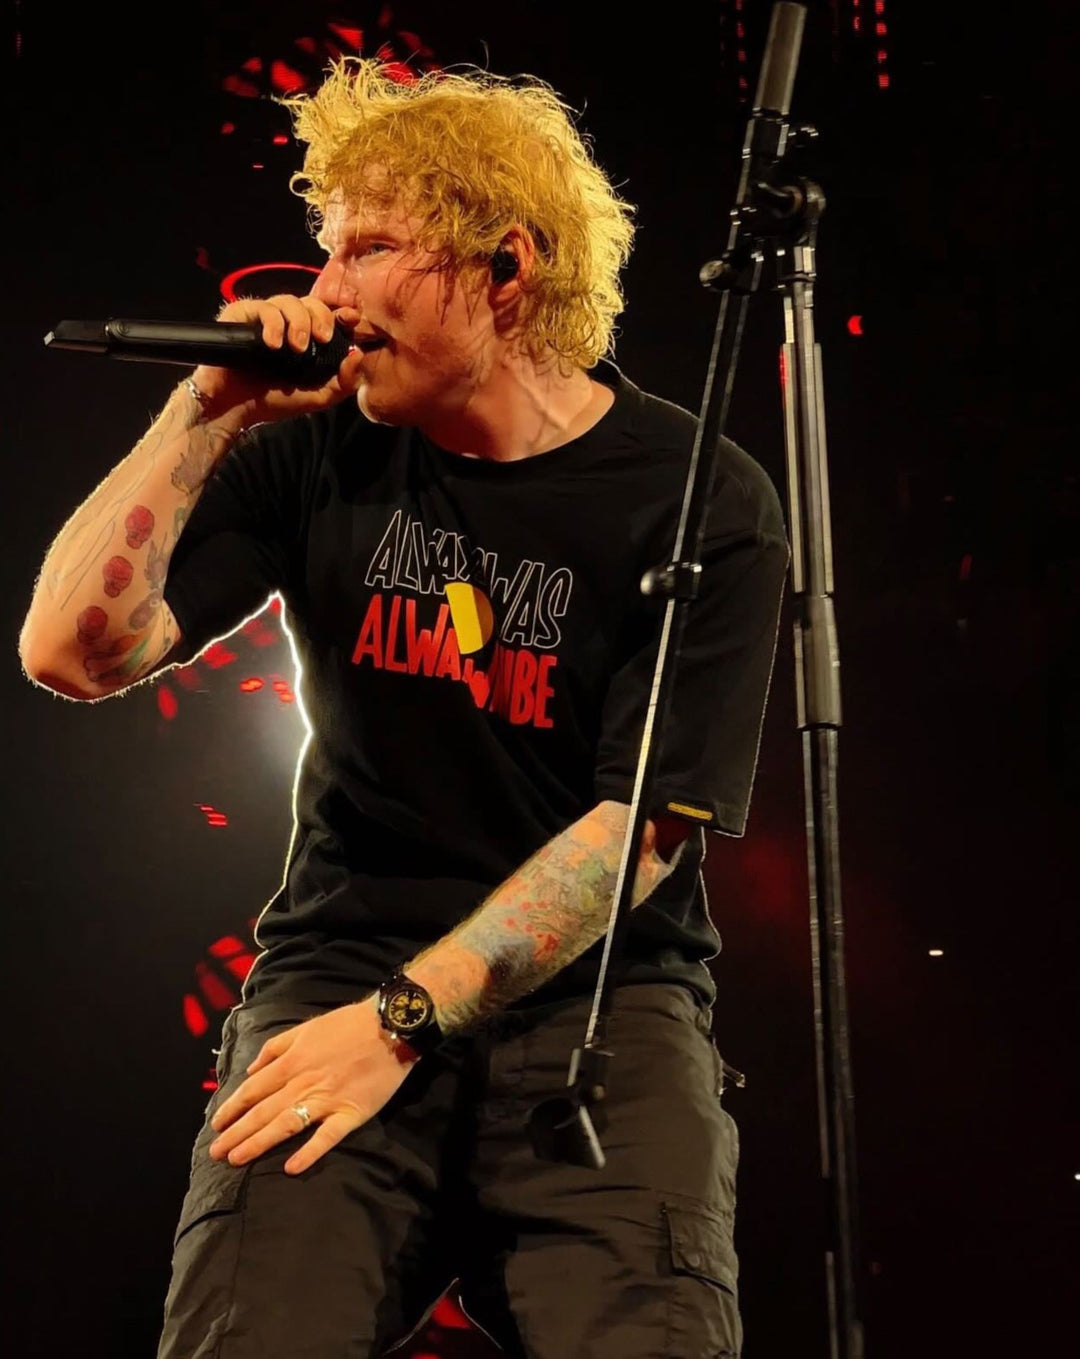 Ed Sheeran wearing. Clothing The Gaps. Black T-shirt with Black, yellow and red 'always was always will be' text screen printed in centre.